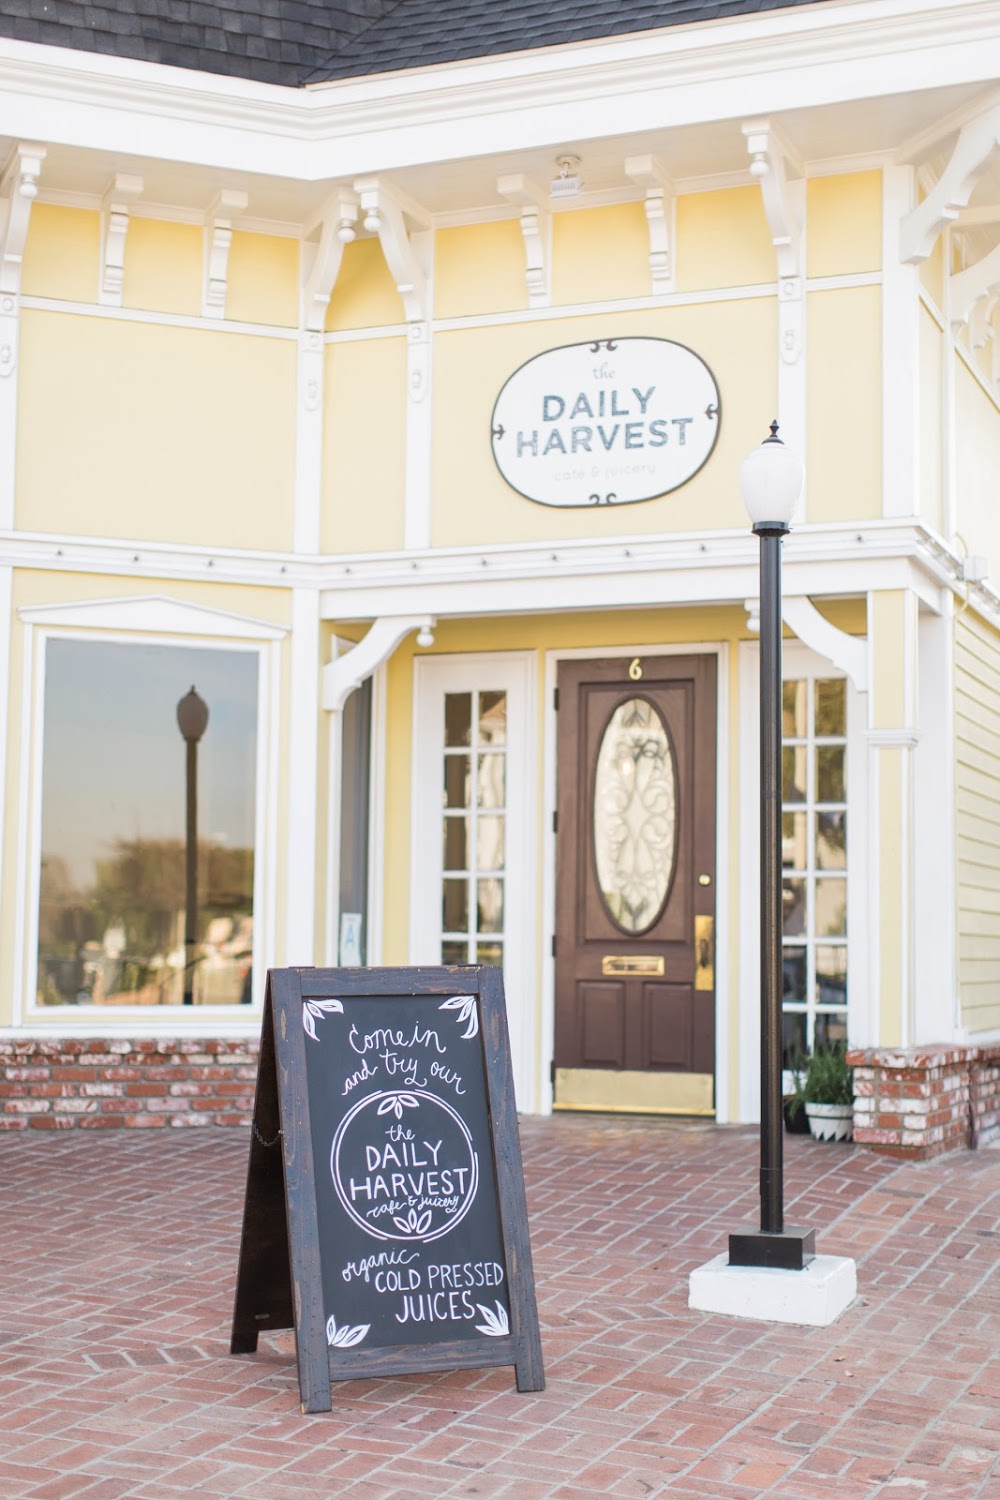 The Daily Harvest Cafe & Juicery